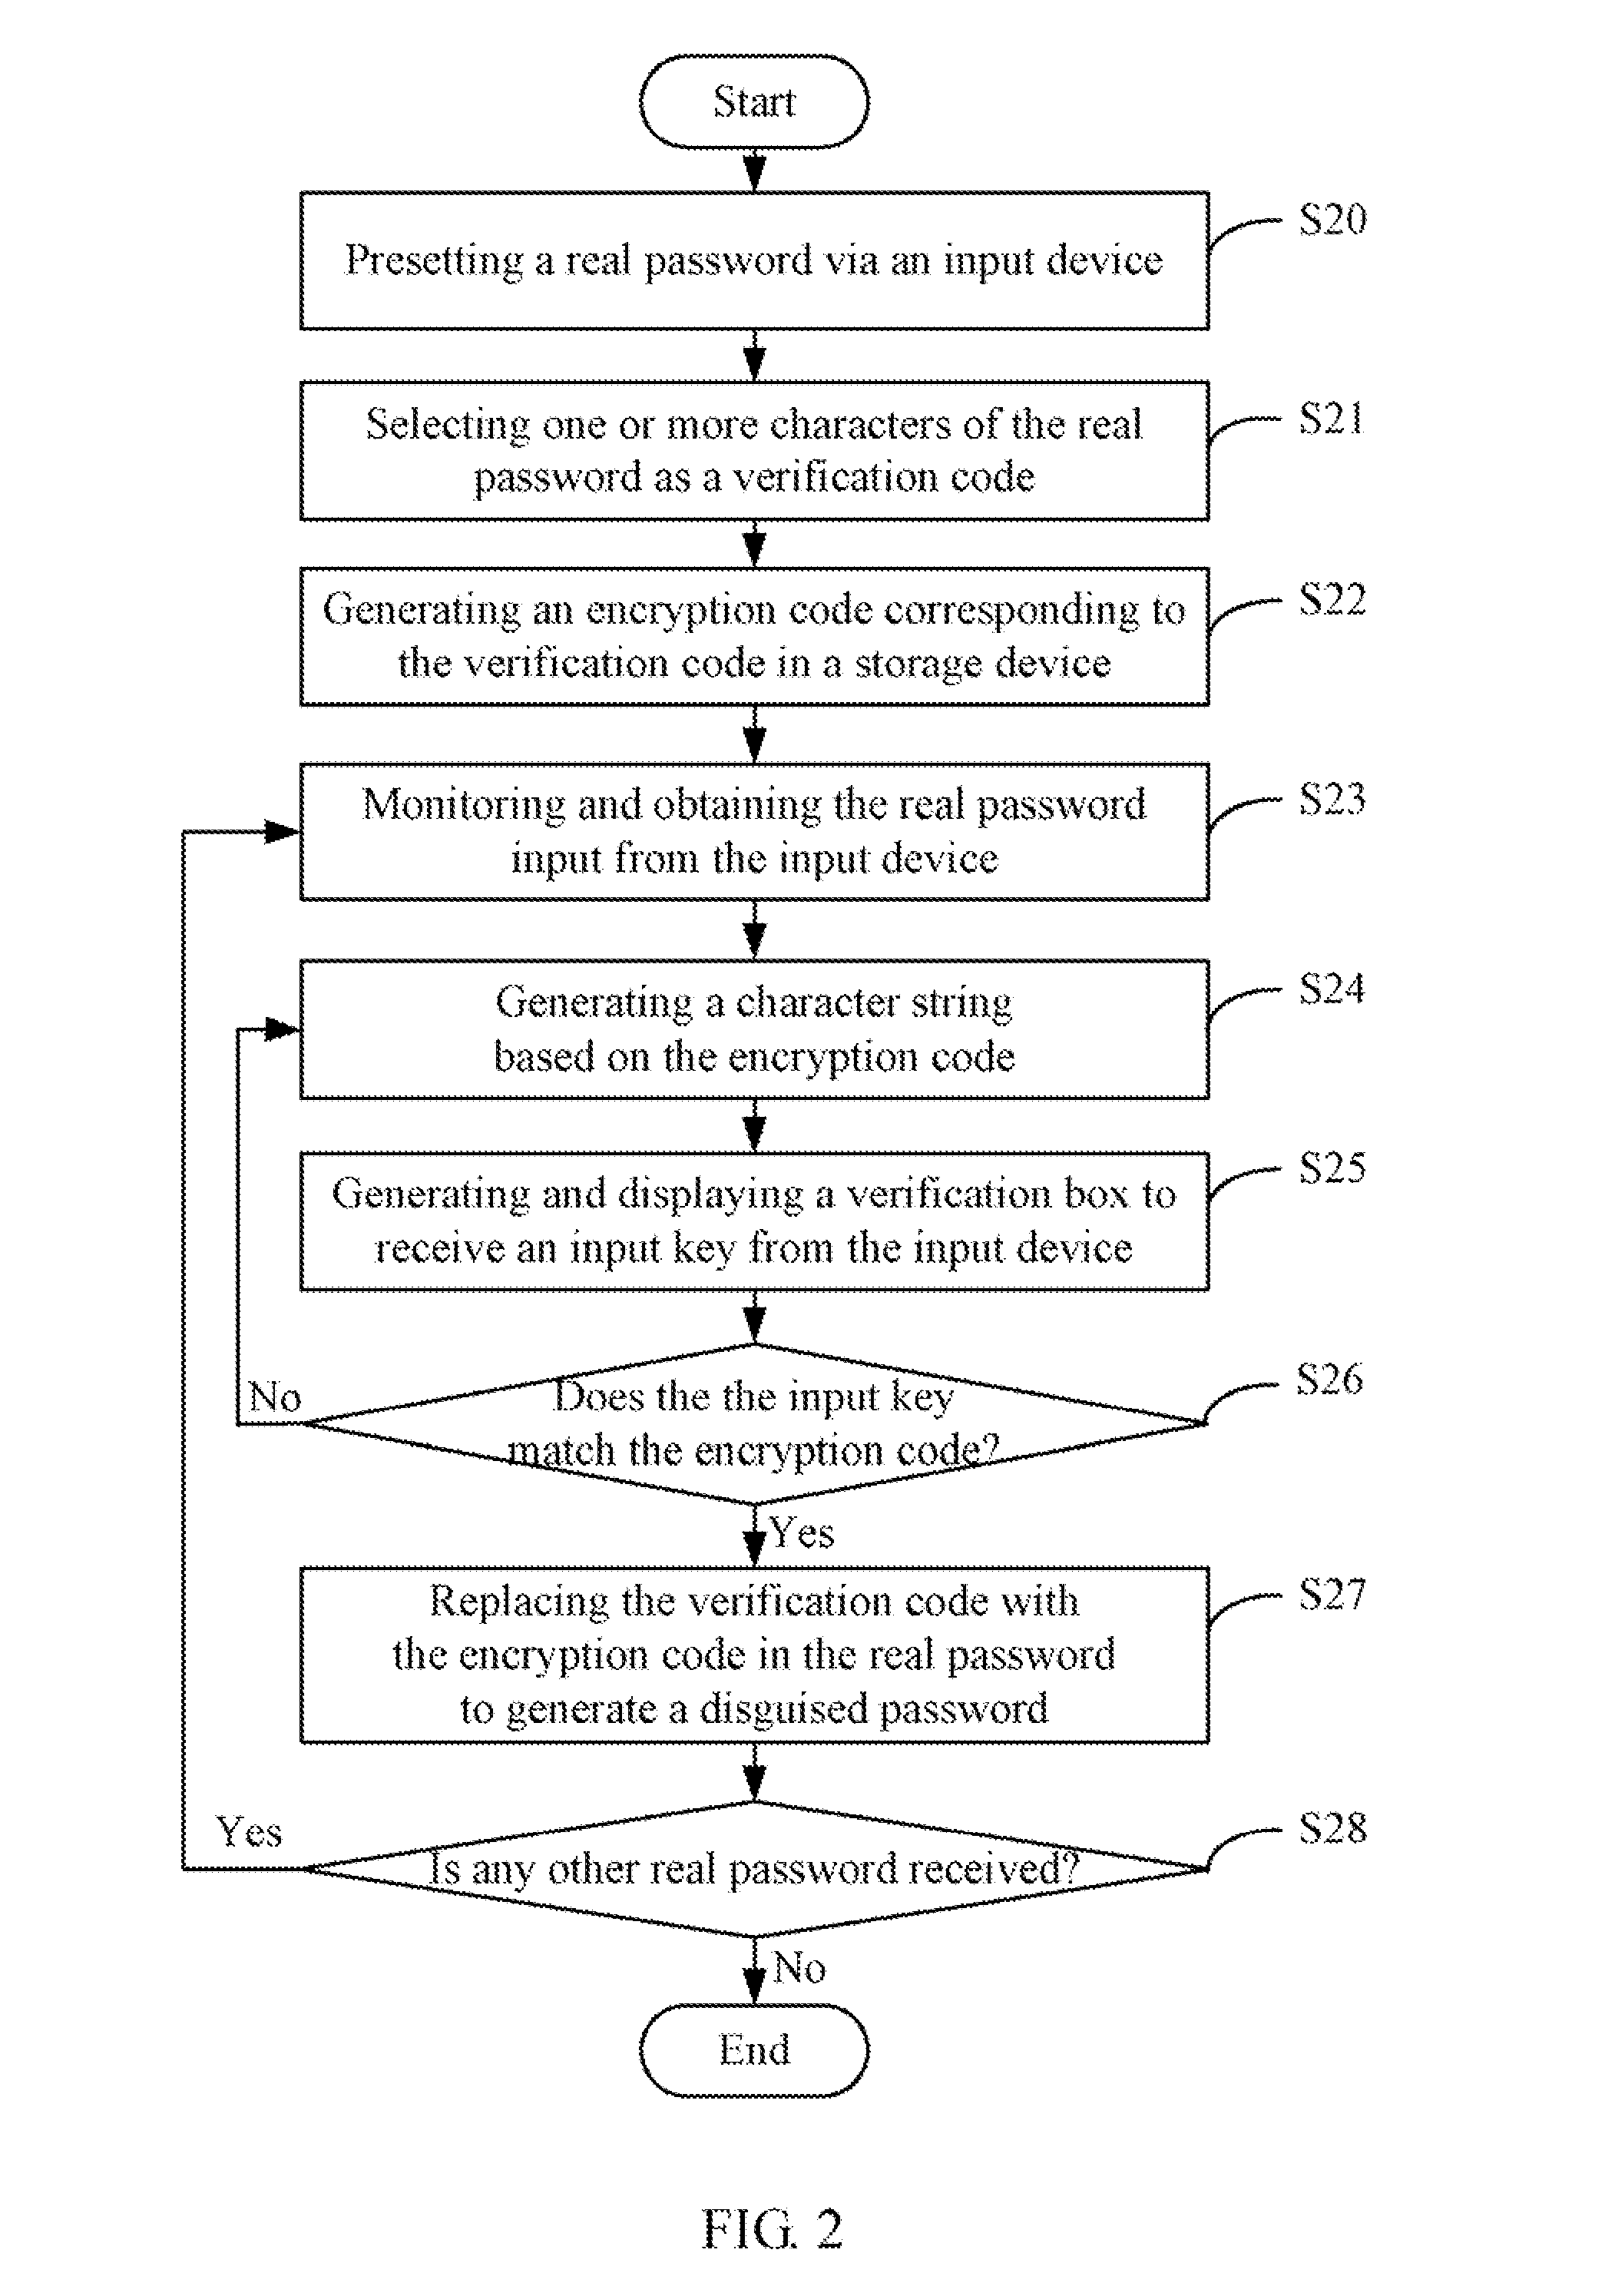 System and method for generating a disguised password based on a real password